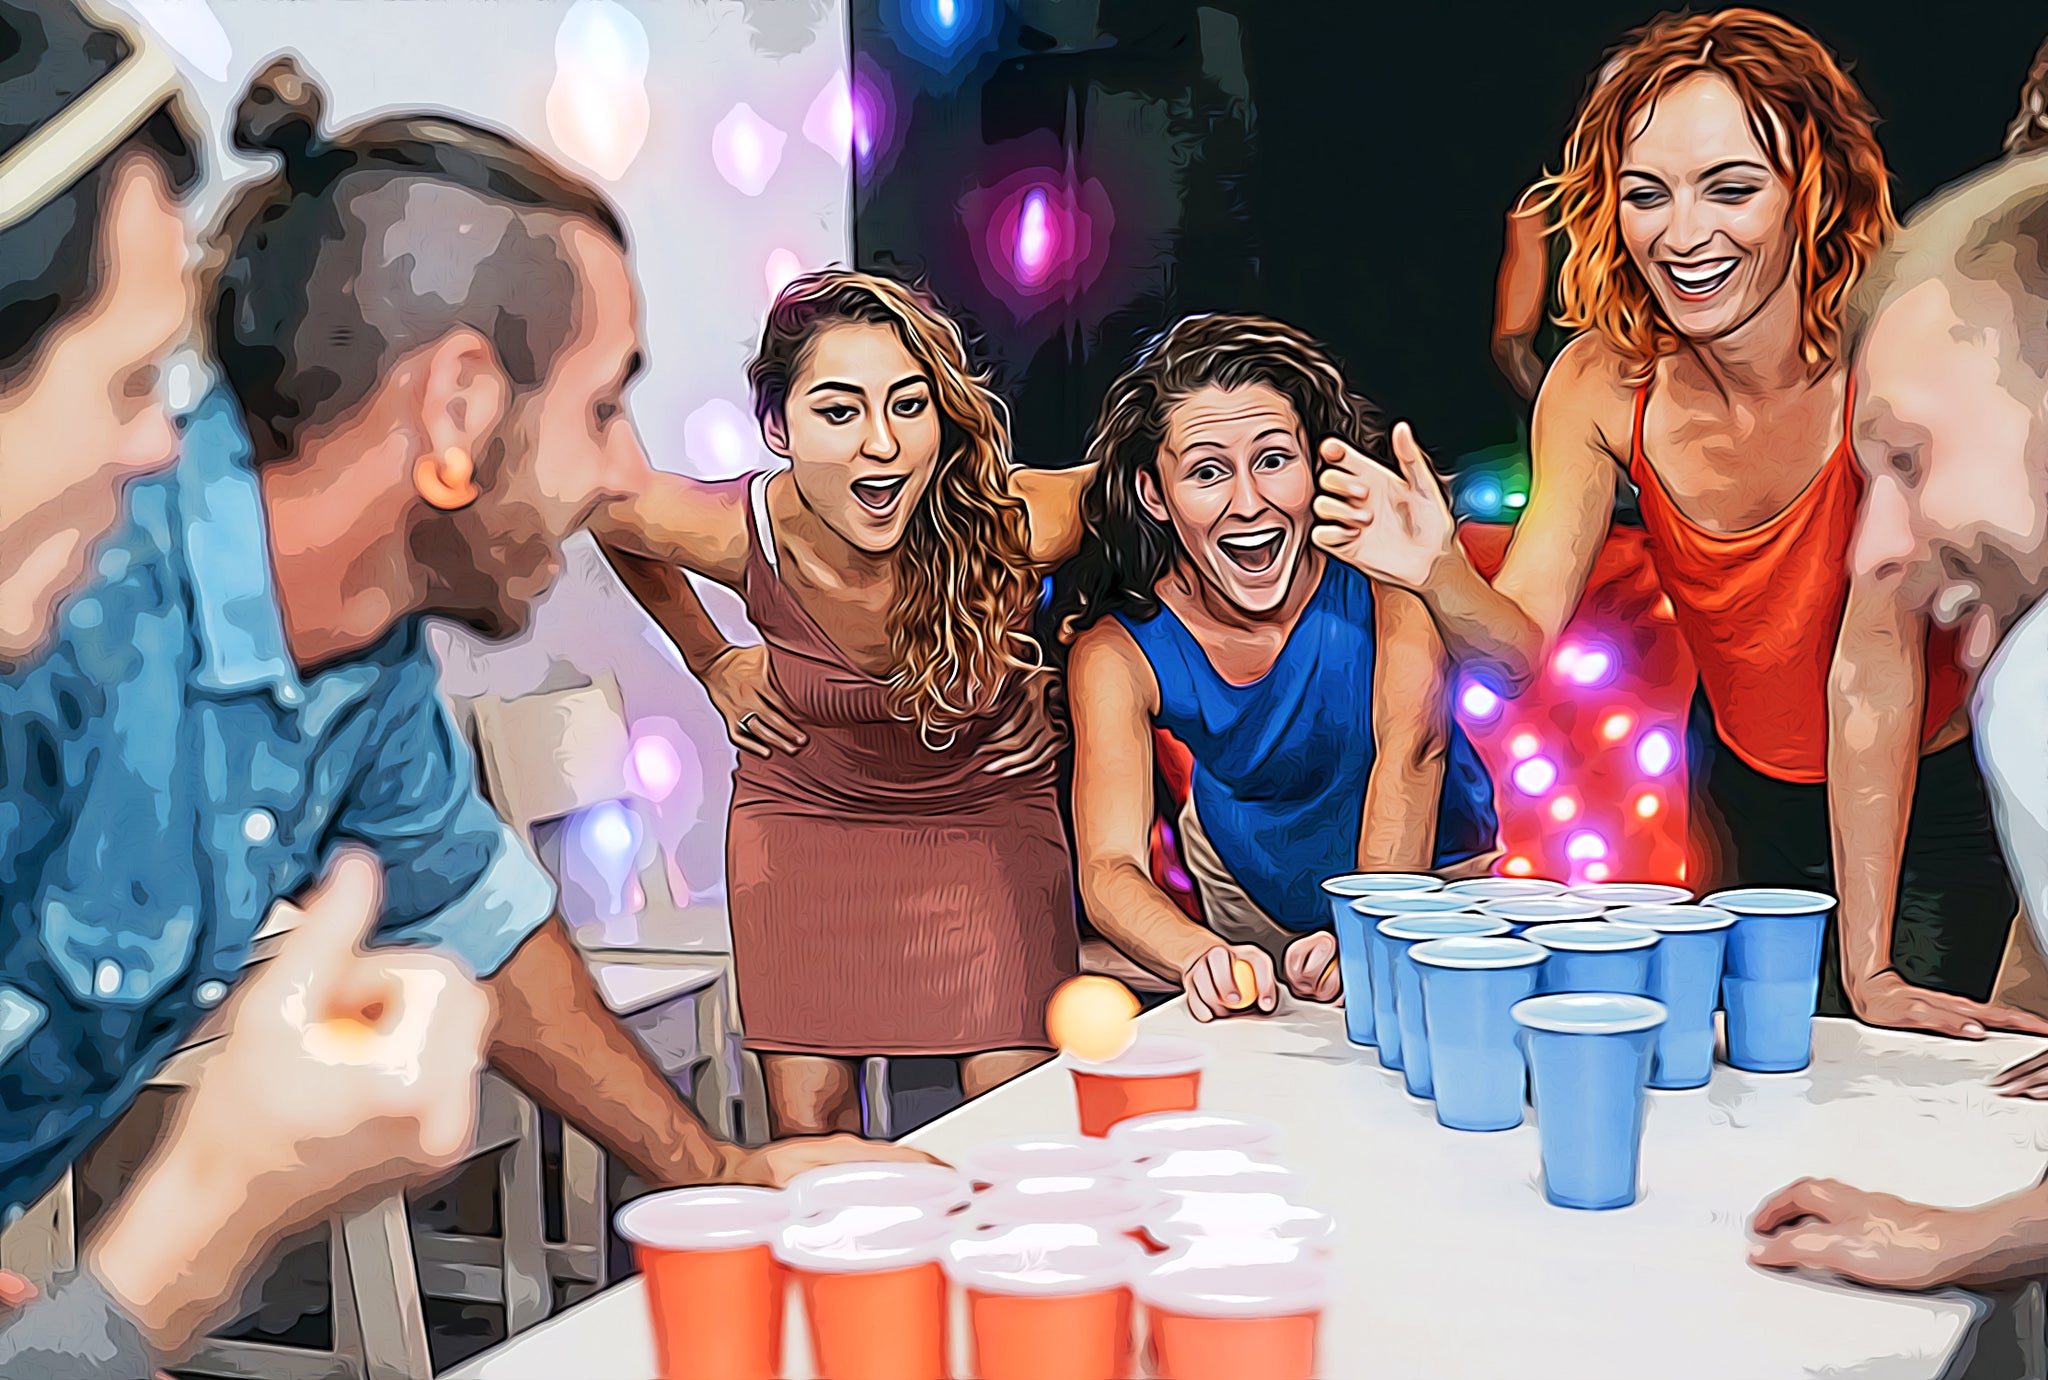 How to play beer pong and strip beer pong?